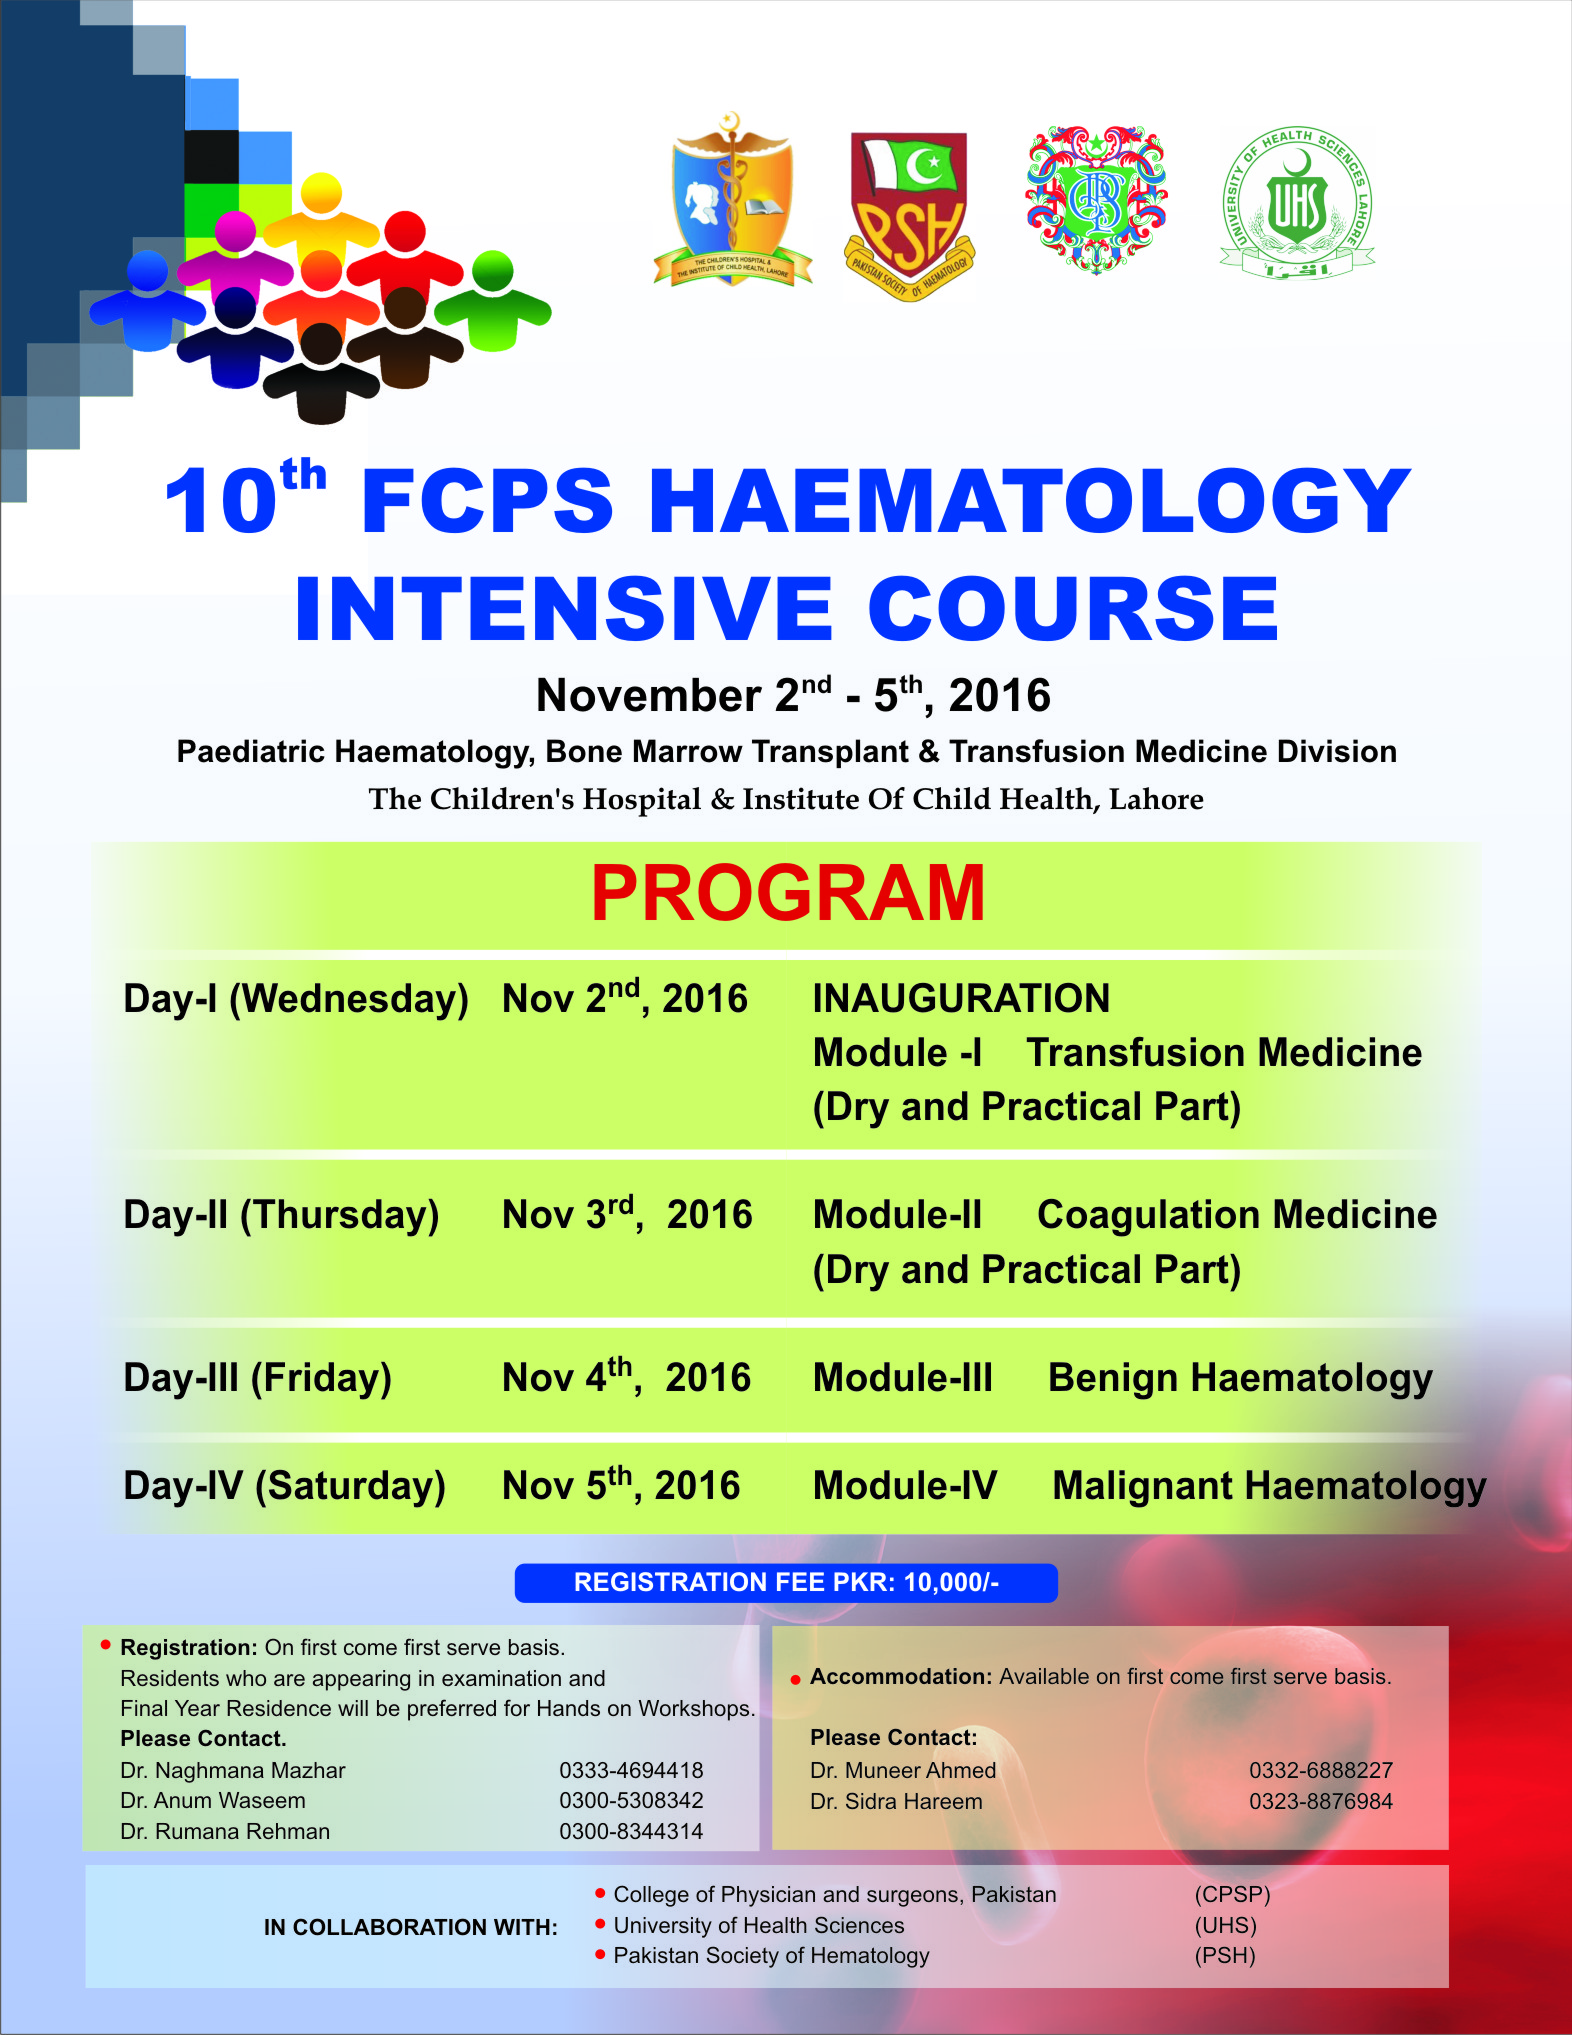 10th FCPS Intensive Course 2016